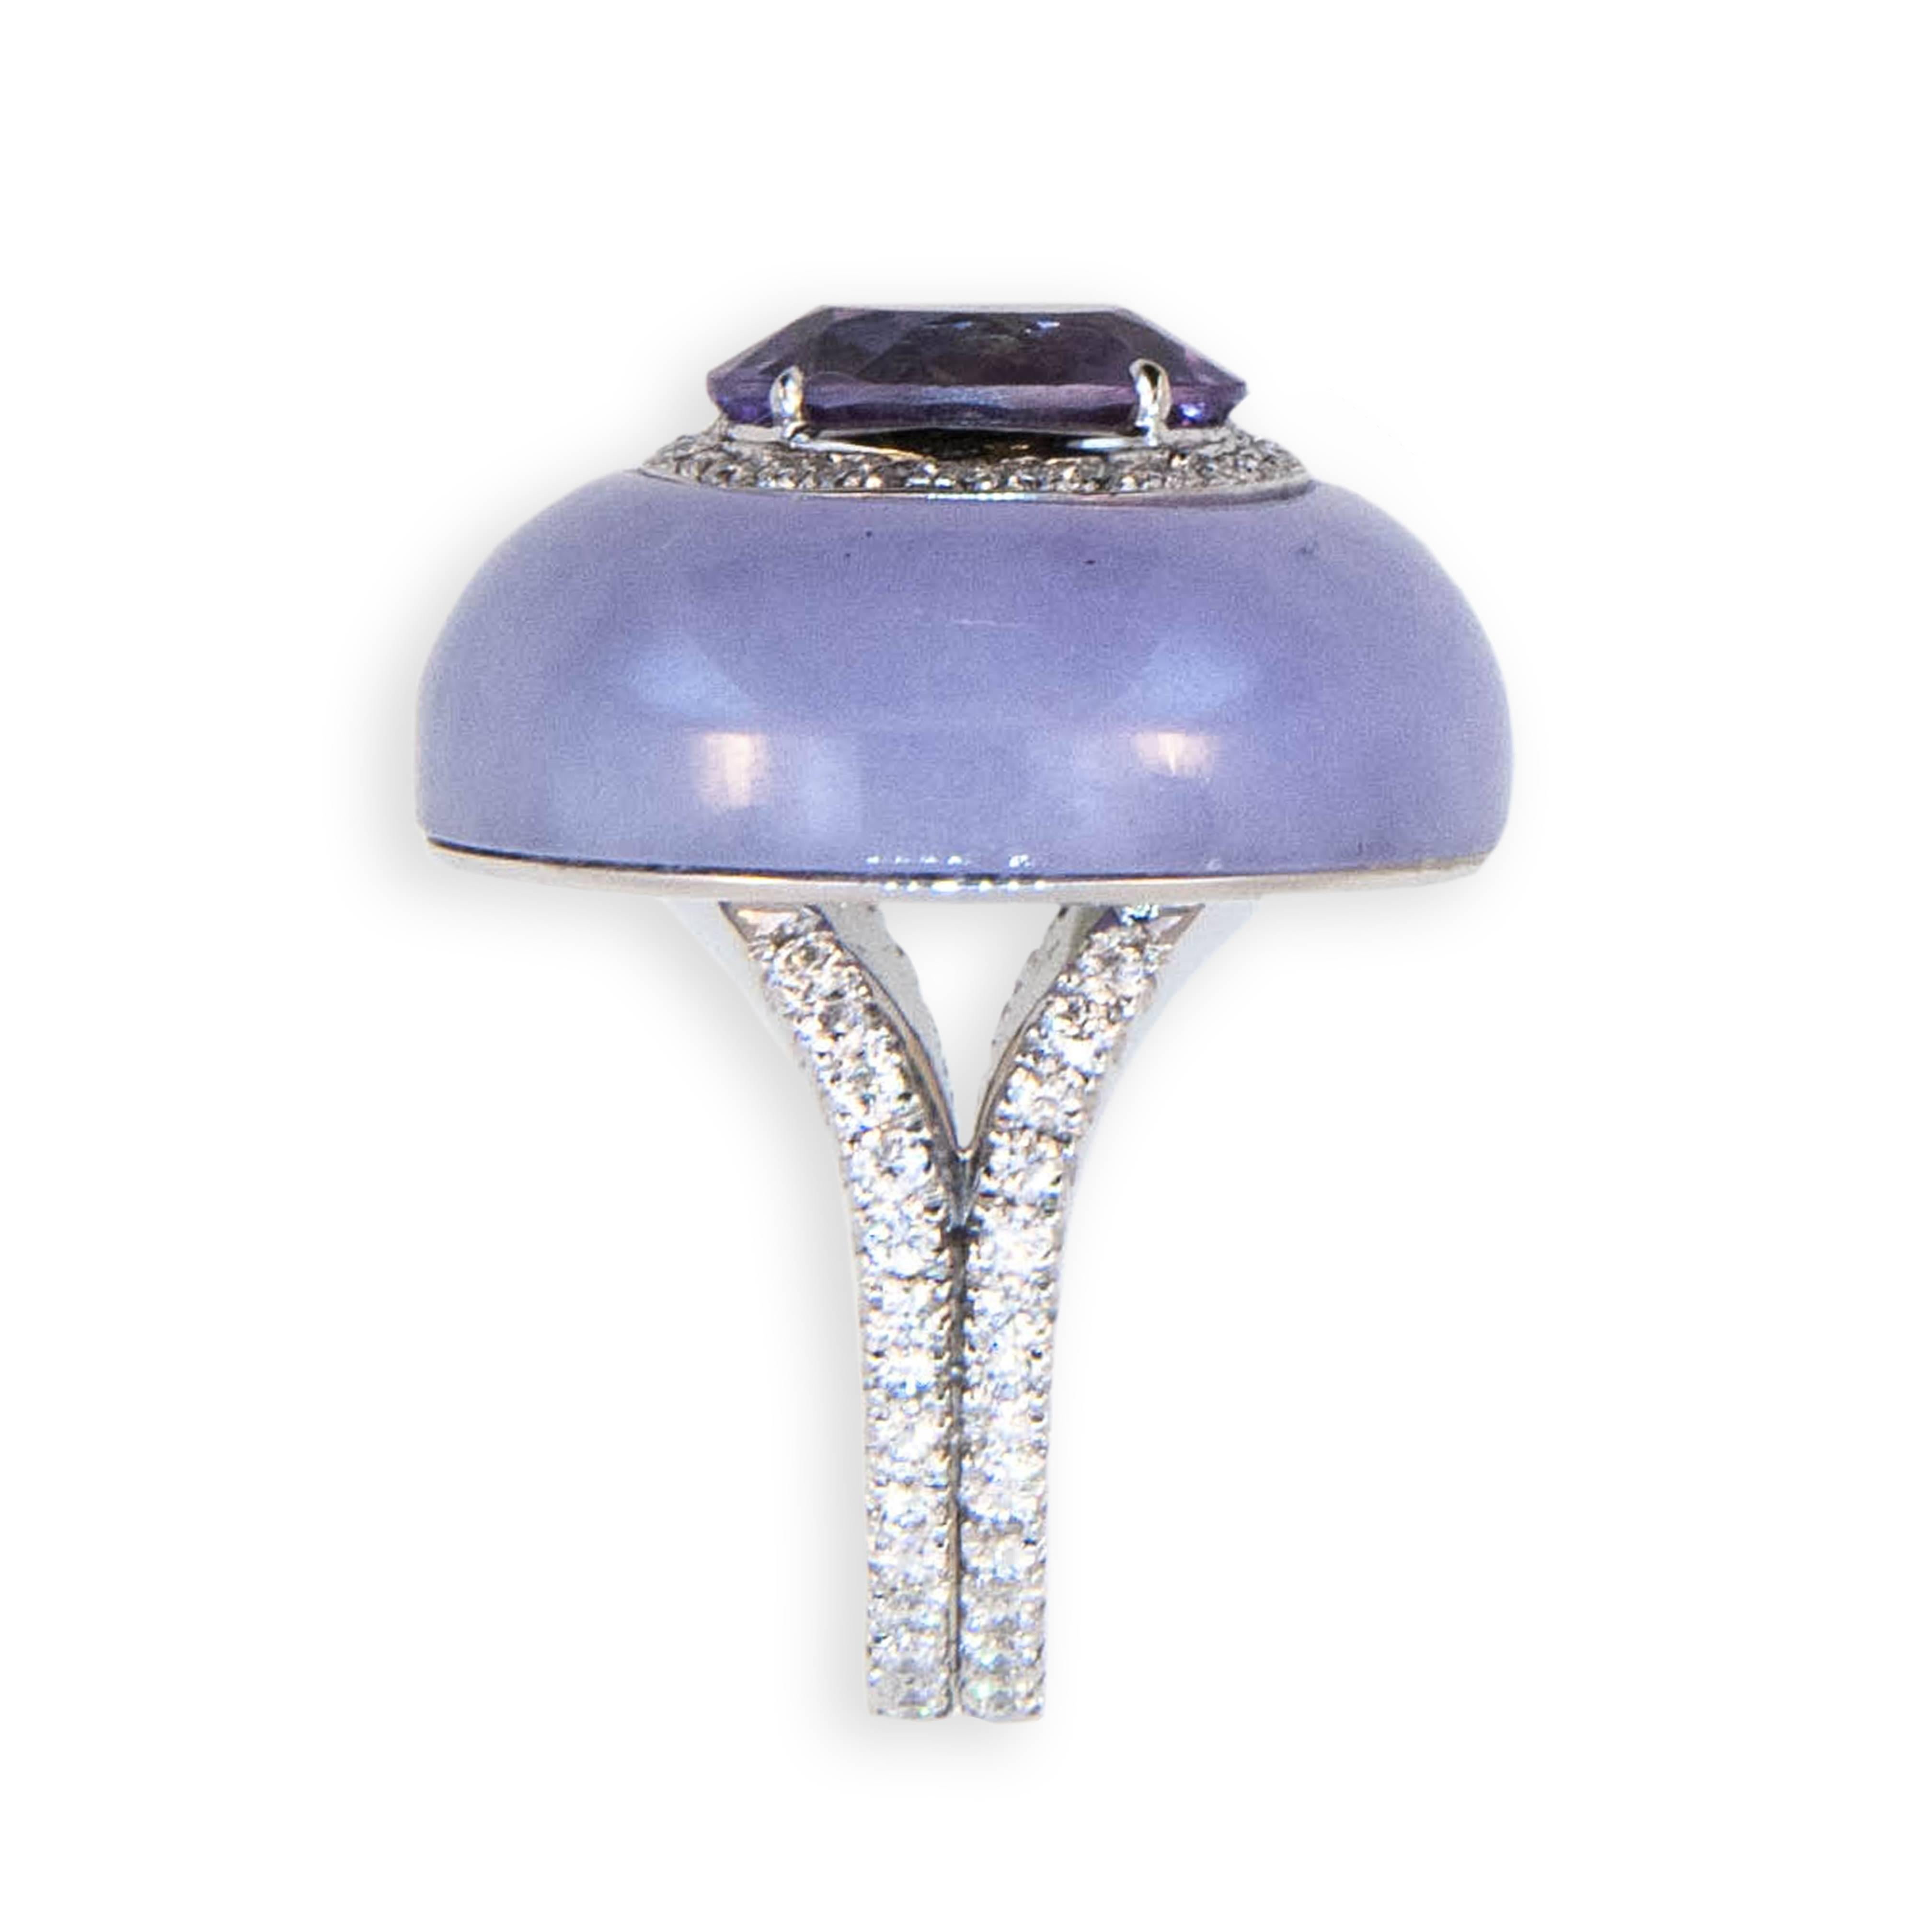 18 karat white gold ring set with one oval amethyst approximately 3.84 carats surrounded by (28) micro-set diamonds , split shank is set with (56) diamonds (84) Diamonds total 1.12 carats total weight  Amethyst and surrounding diamonds are set into